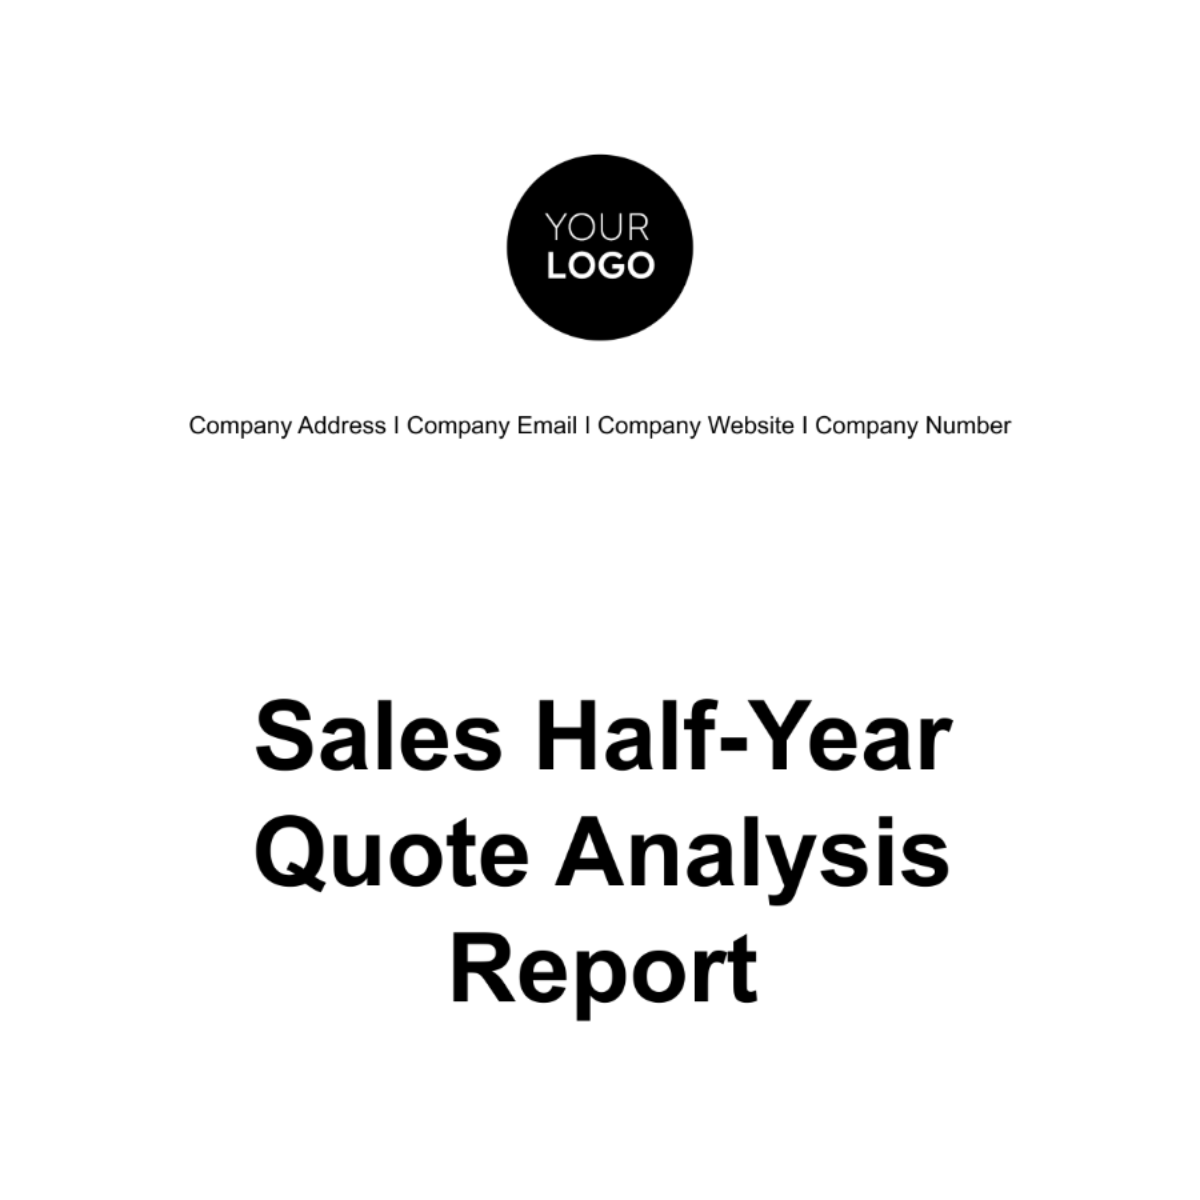 Free Sales Half-Year Quote Analysis Report Template